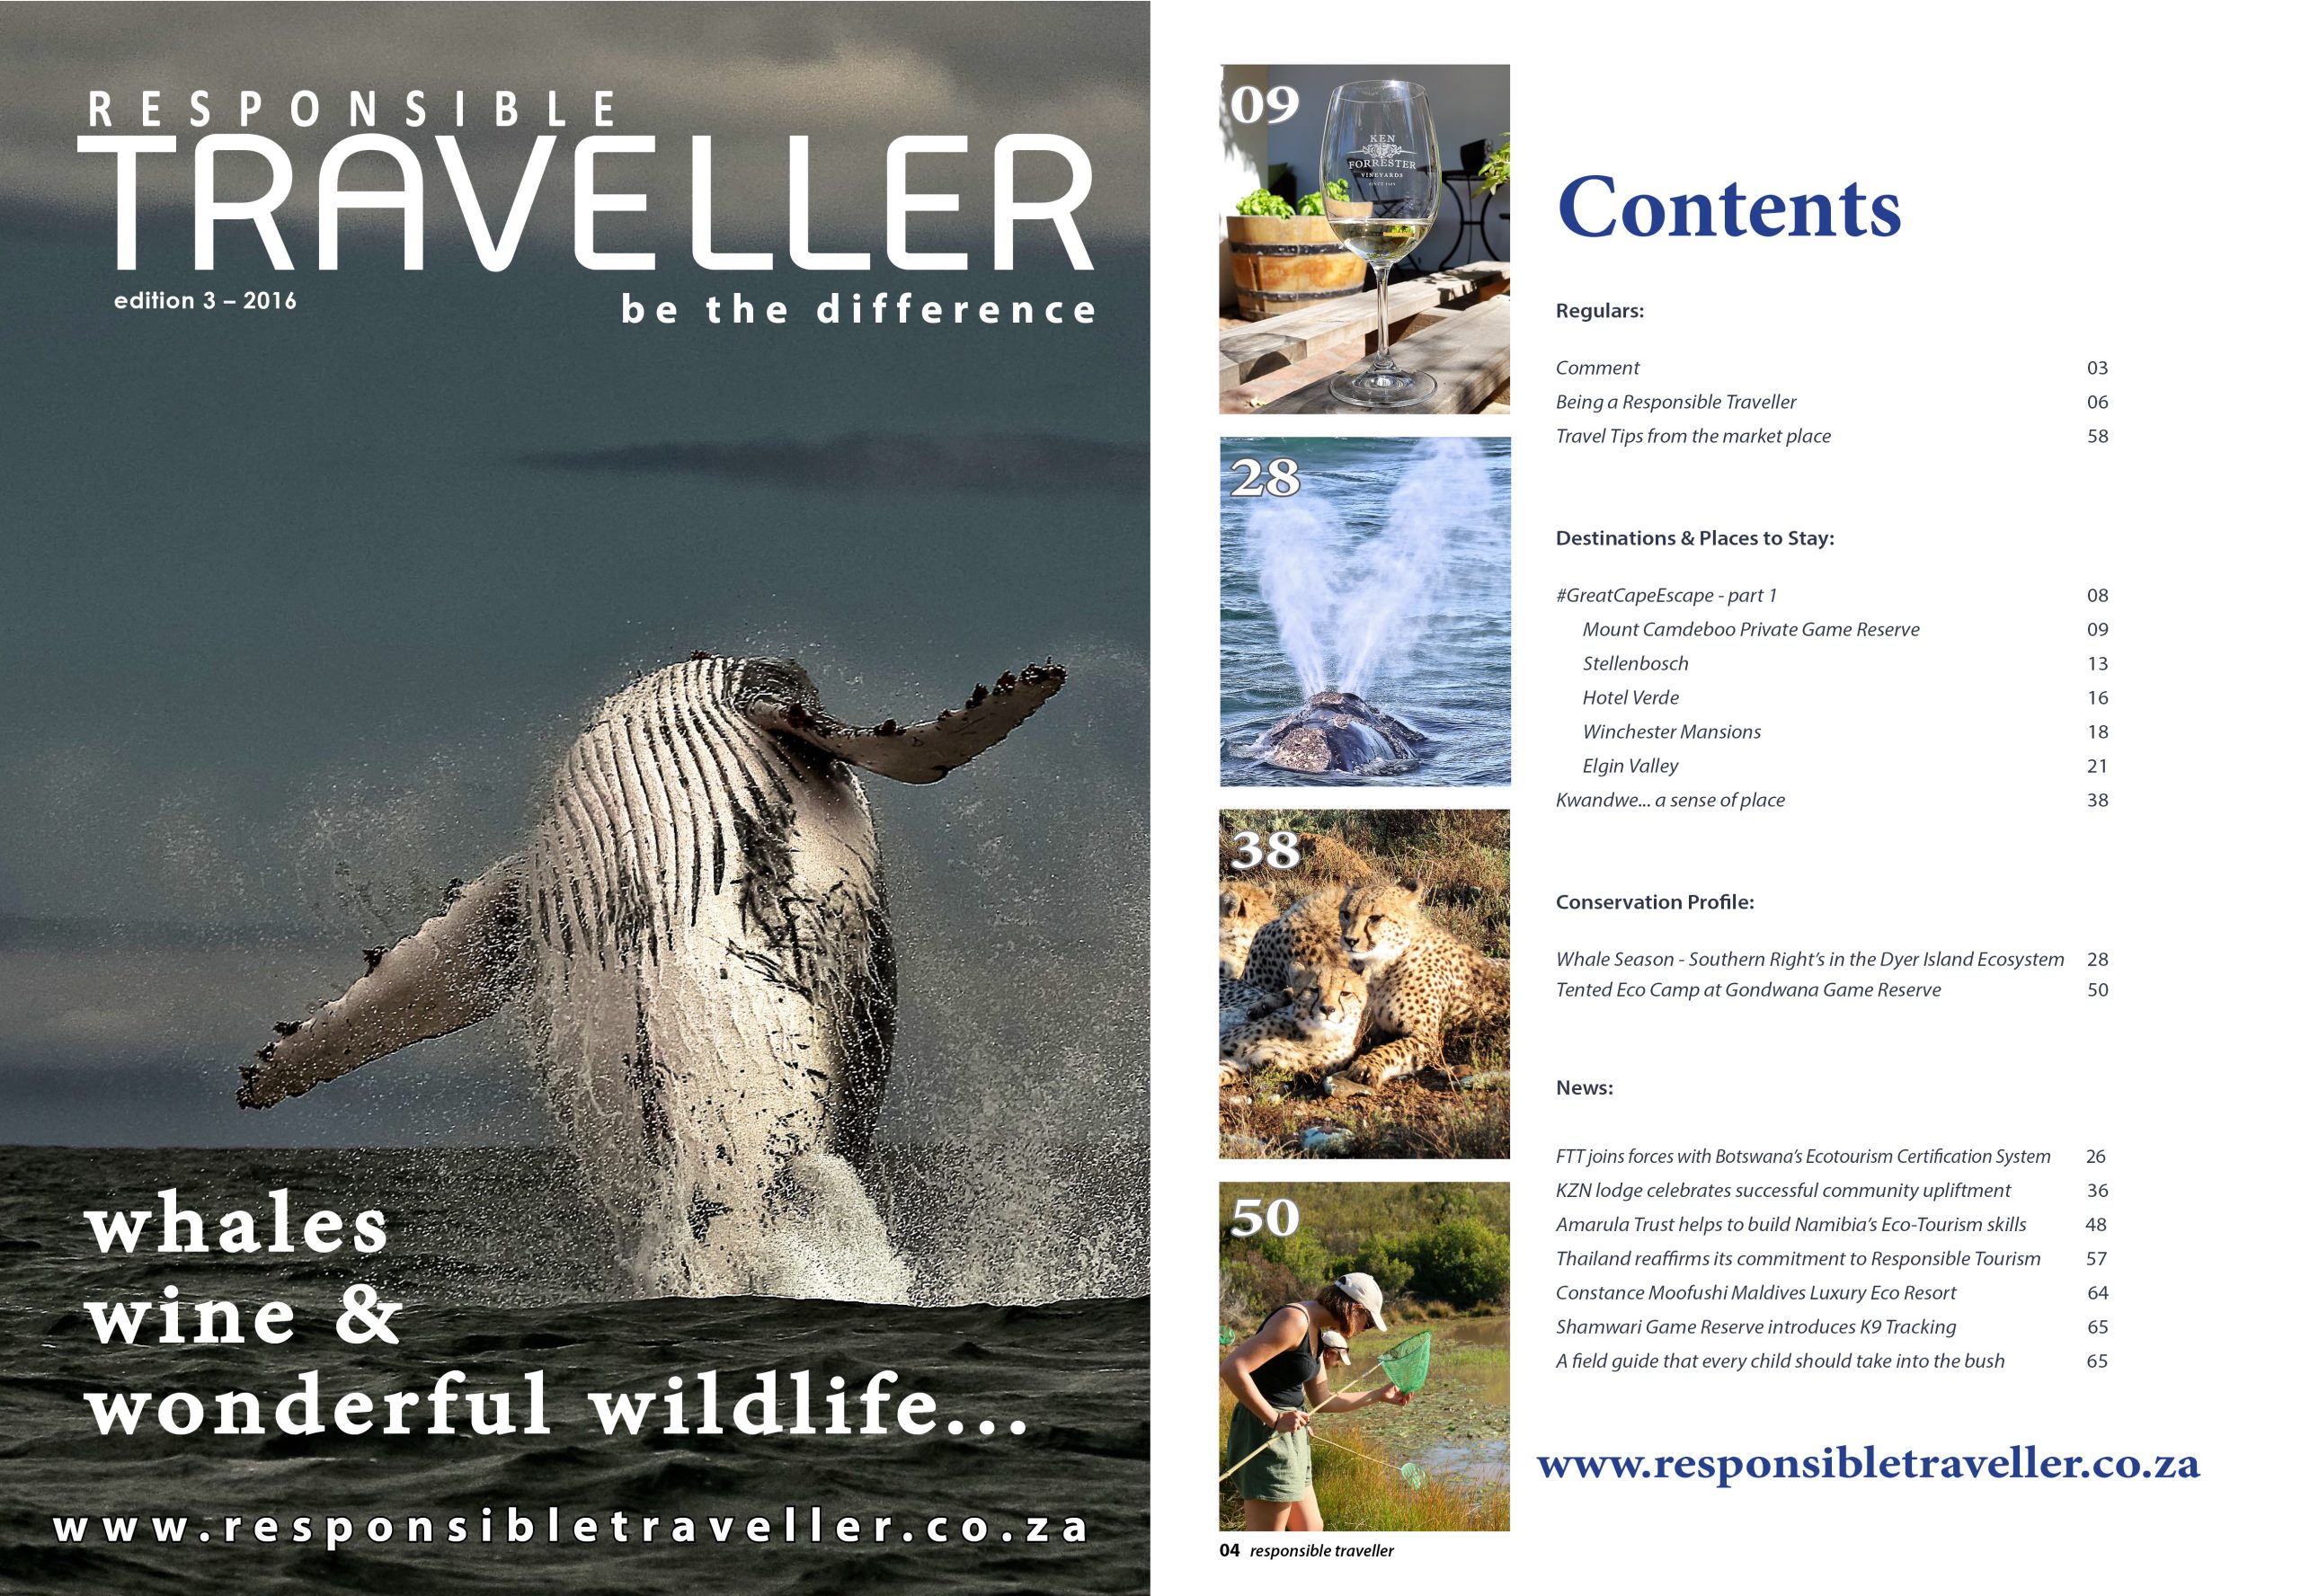 Responsible Traveller Edition 3-2016